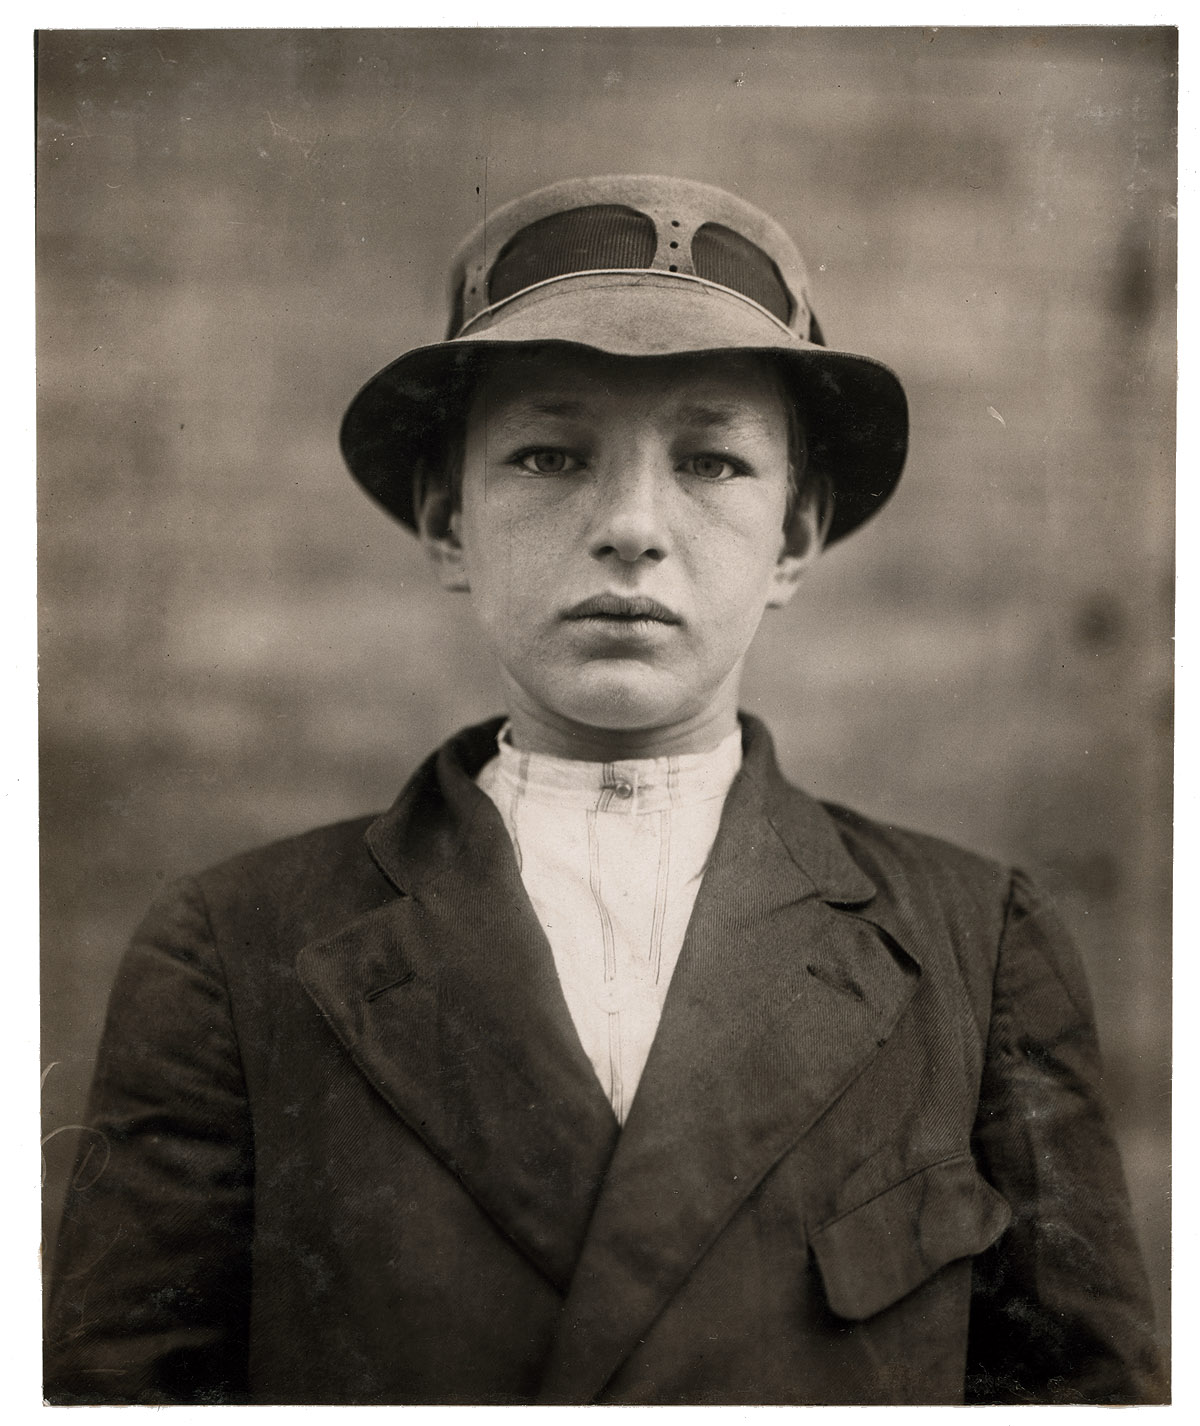 May 1910. Wilmington, Delaware. "William Gross, 516 Tatnall Street. Newsboy, 15 years of age. Selling papers 5 years. Average earnings 50 cents per week. Father, carpenter, $18 week. Selling newspapers own choice, to get money to go to moving picture shows. Visits saloons. Smokes sometimes. "Serves papers" to prostitutes. On May 25 William gave to investigator a list of houses of prostitution written in his own handwriting, to which he serves papers. He also tells a story of occasionally guiding strangers to these houses, for which he receives from 15 cents to a quarter." Photograph by Lewis Wickes Hine. View full size.